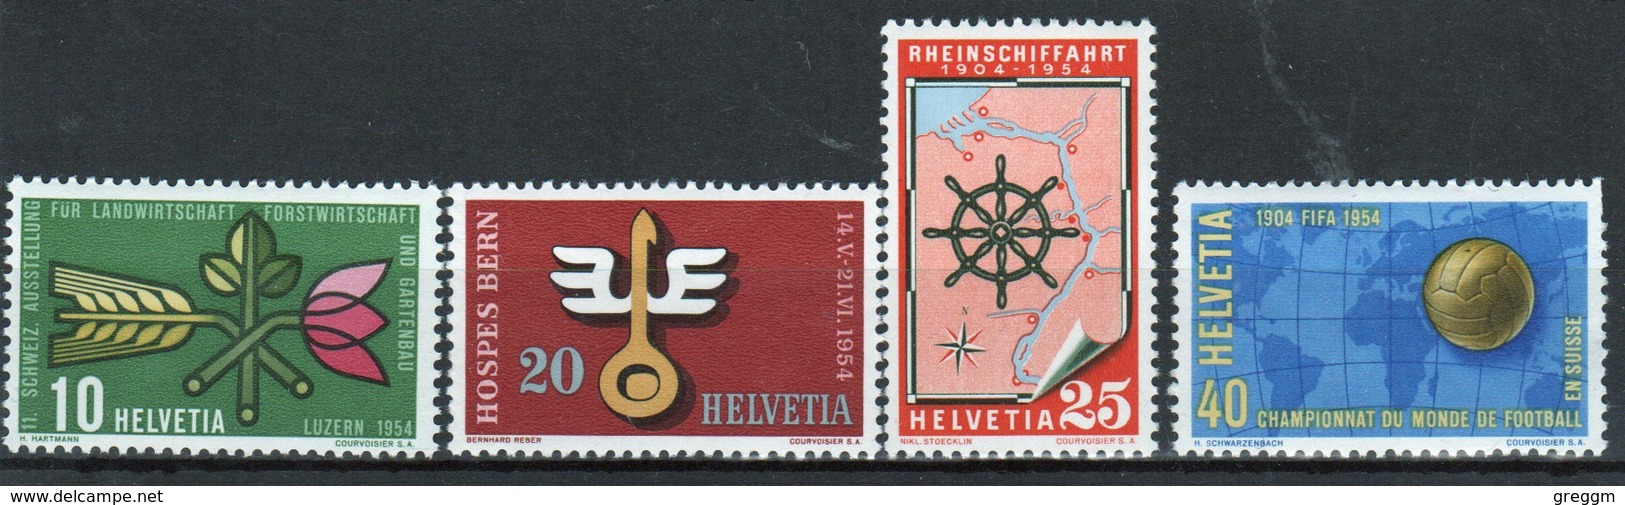 Switzerland 1954 Set Of Stamps To Issued To Commemorate Publicity Issue. - Ungebraucht